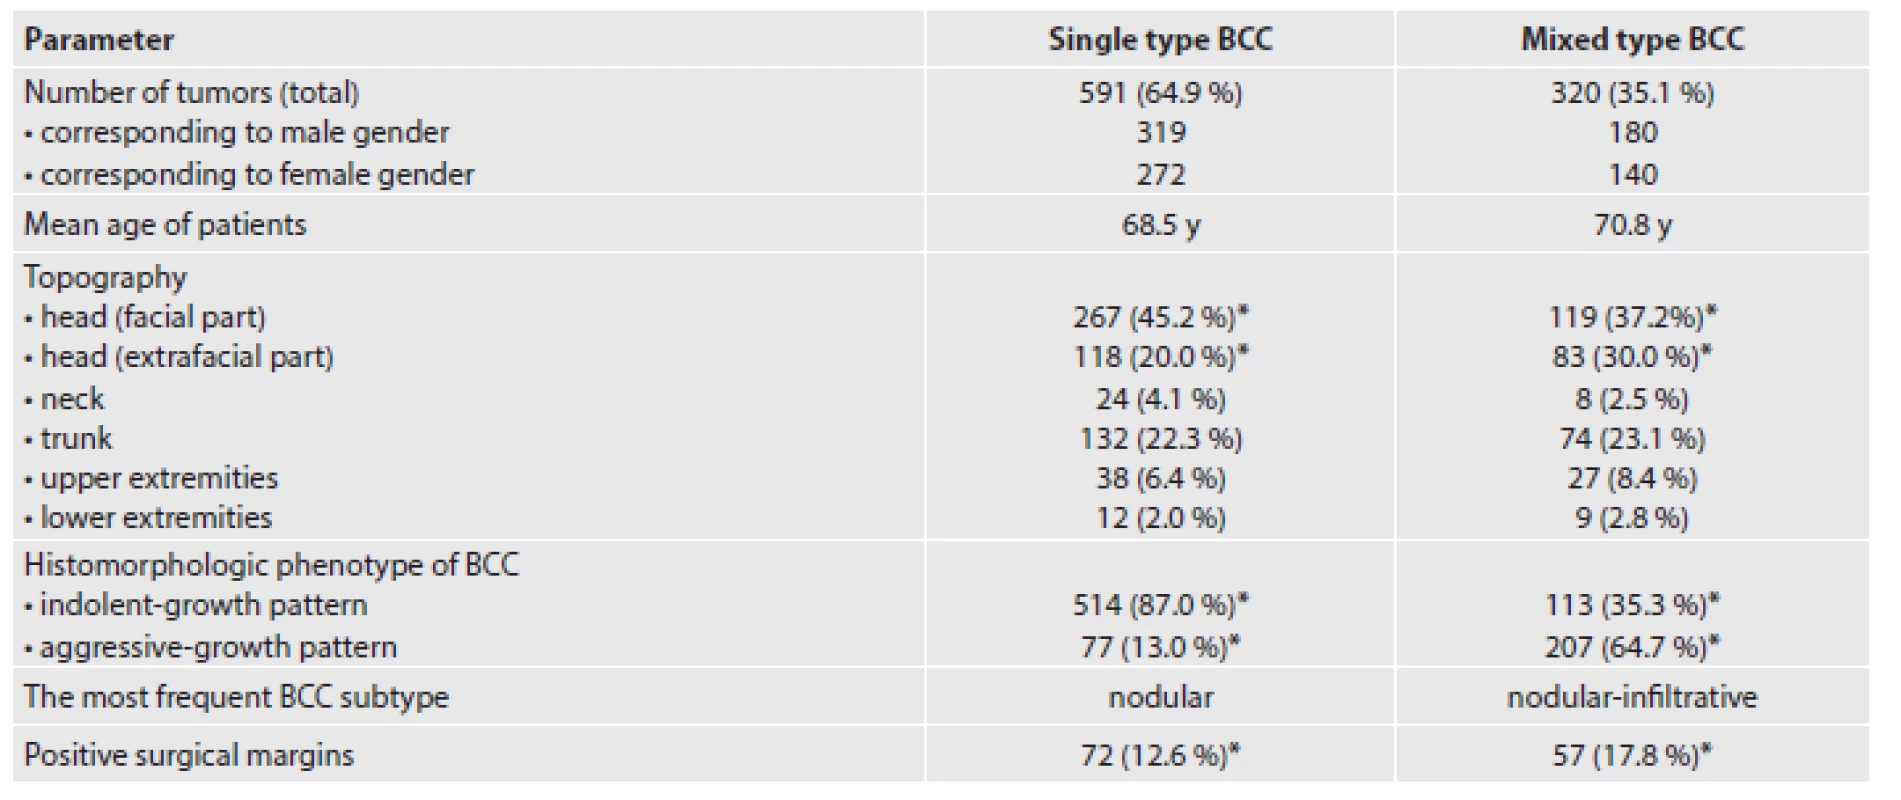 A summary of the clinical and histopathological characteristics of our cohort of patients categorized into single type and mixed type BCC subgroups. Symbol * indicates a statistical significance (P &lt; 0.05).